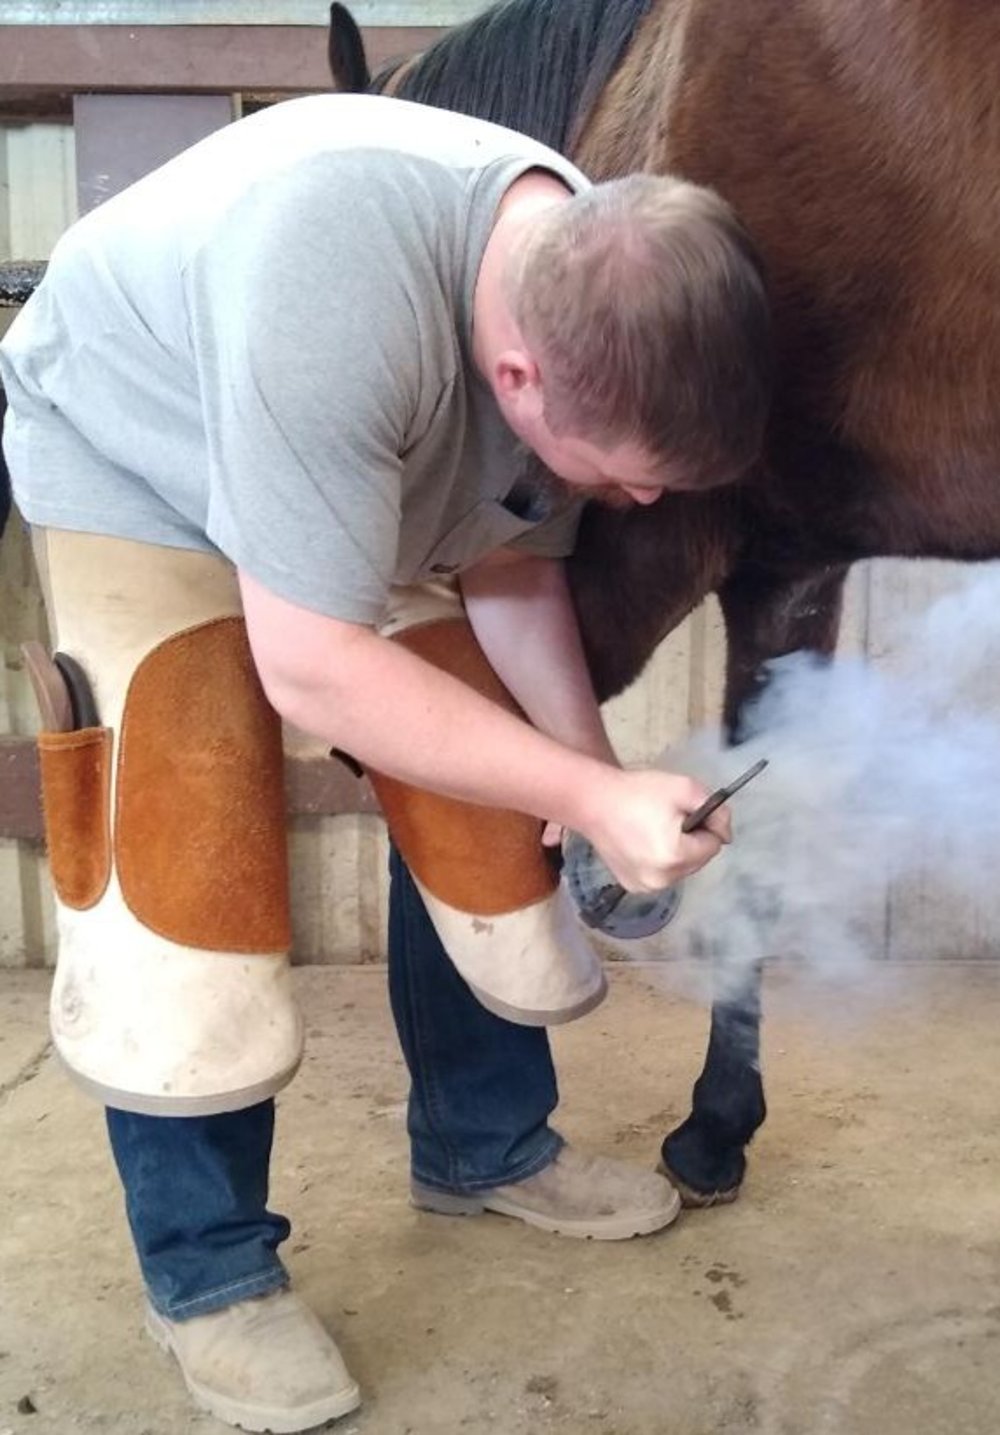 There’s can’t be any skills that have been around for so long and barely changed in hundreds of years. Watching our farrier shoe our horses was fascinating  watch. A true craftsman at work.